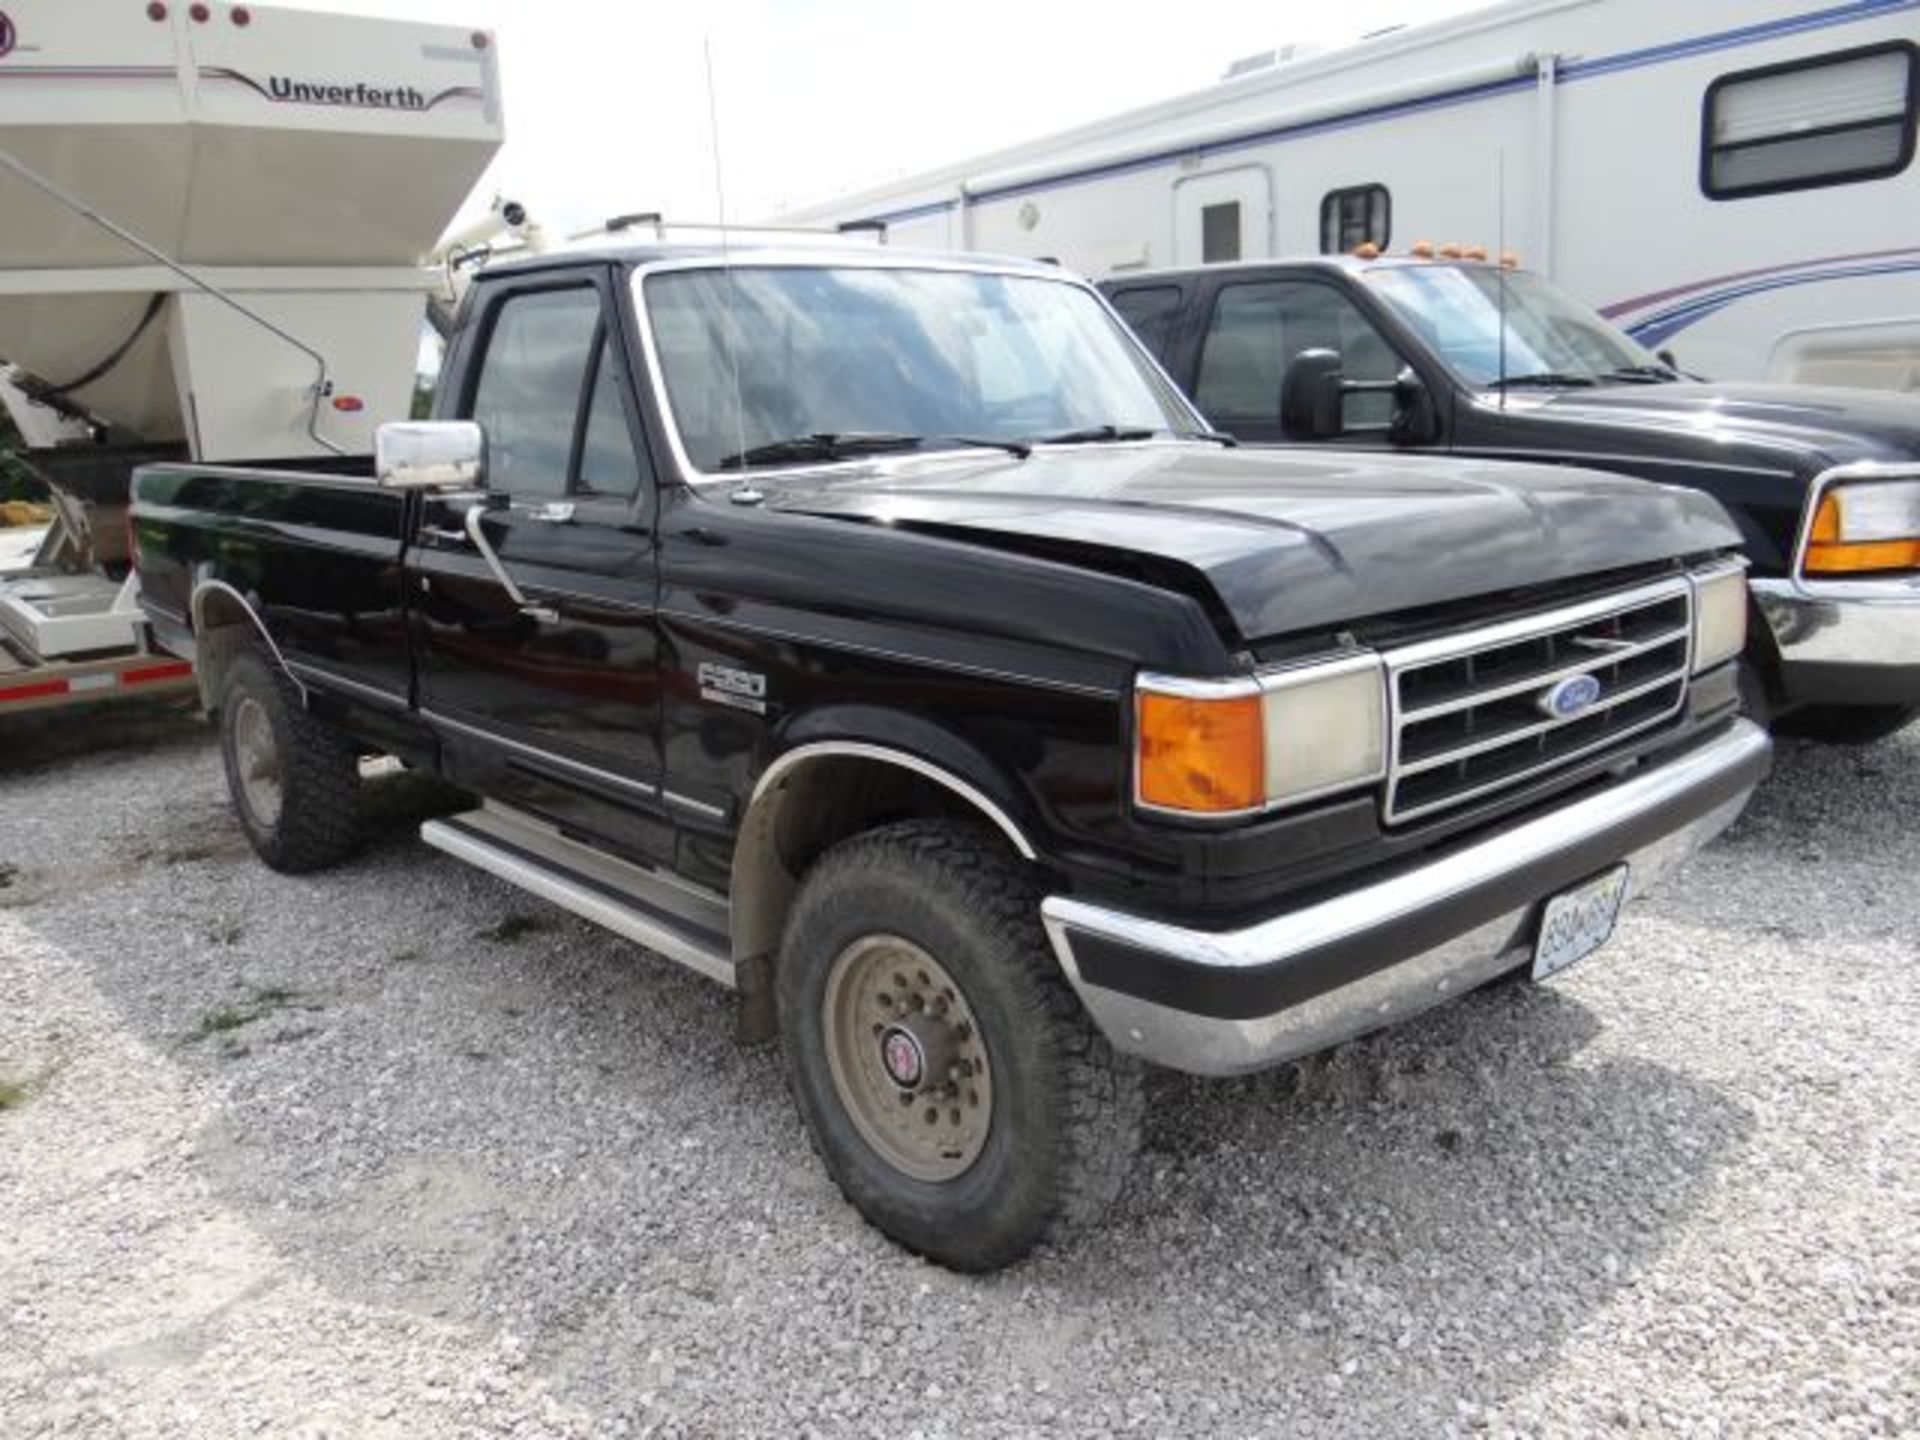 1989 Ford F250 XLT Truck 4wd, Diesel, Power Windows & Locks, Title in the Office, vin#886441 - Image 2 of 3